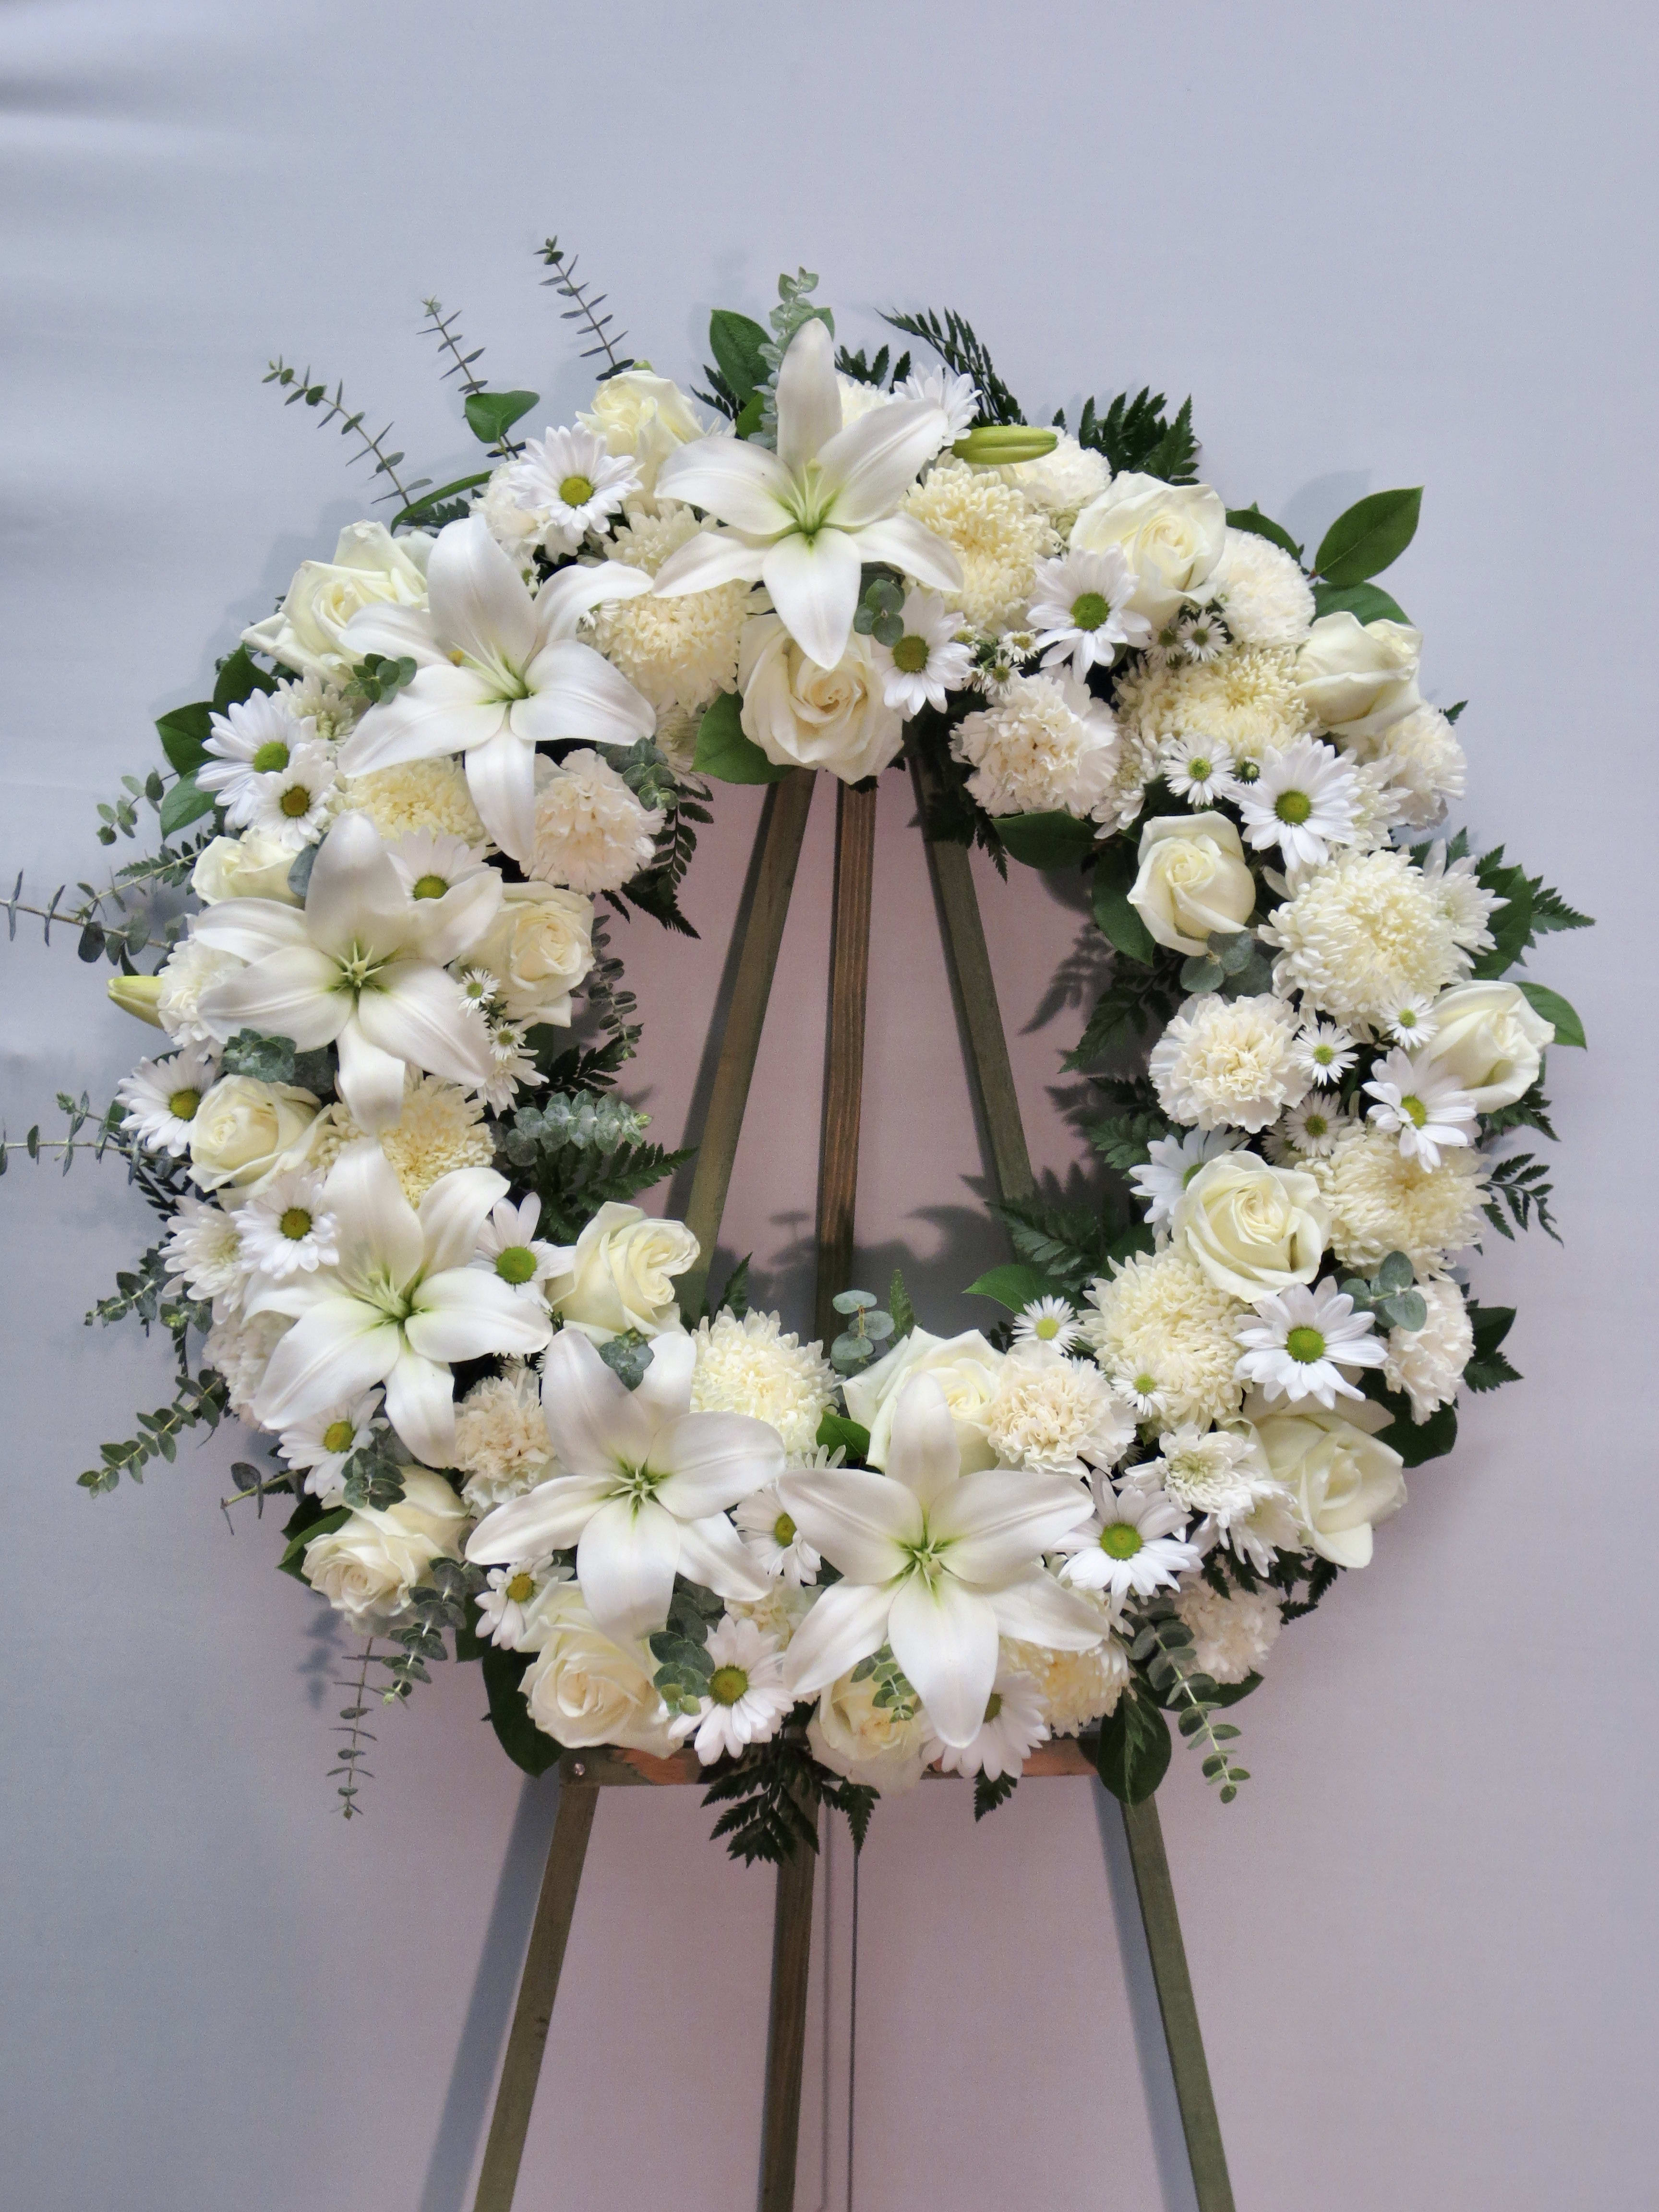 Open round ring Silk Artificial Funeral Flowers Wreath Memorial Grave  Tribute | eBay